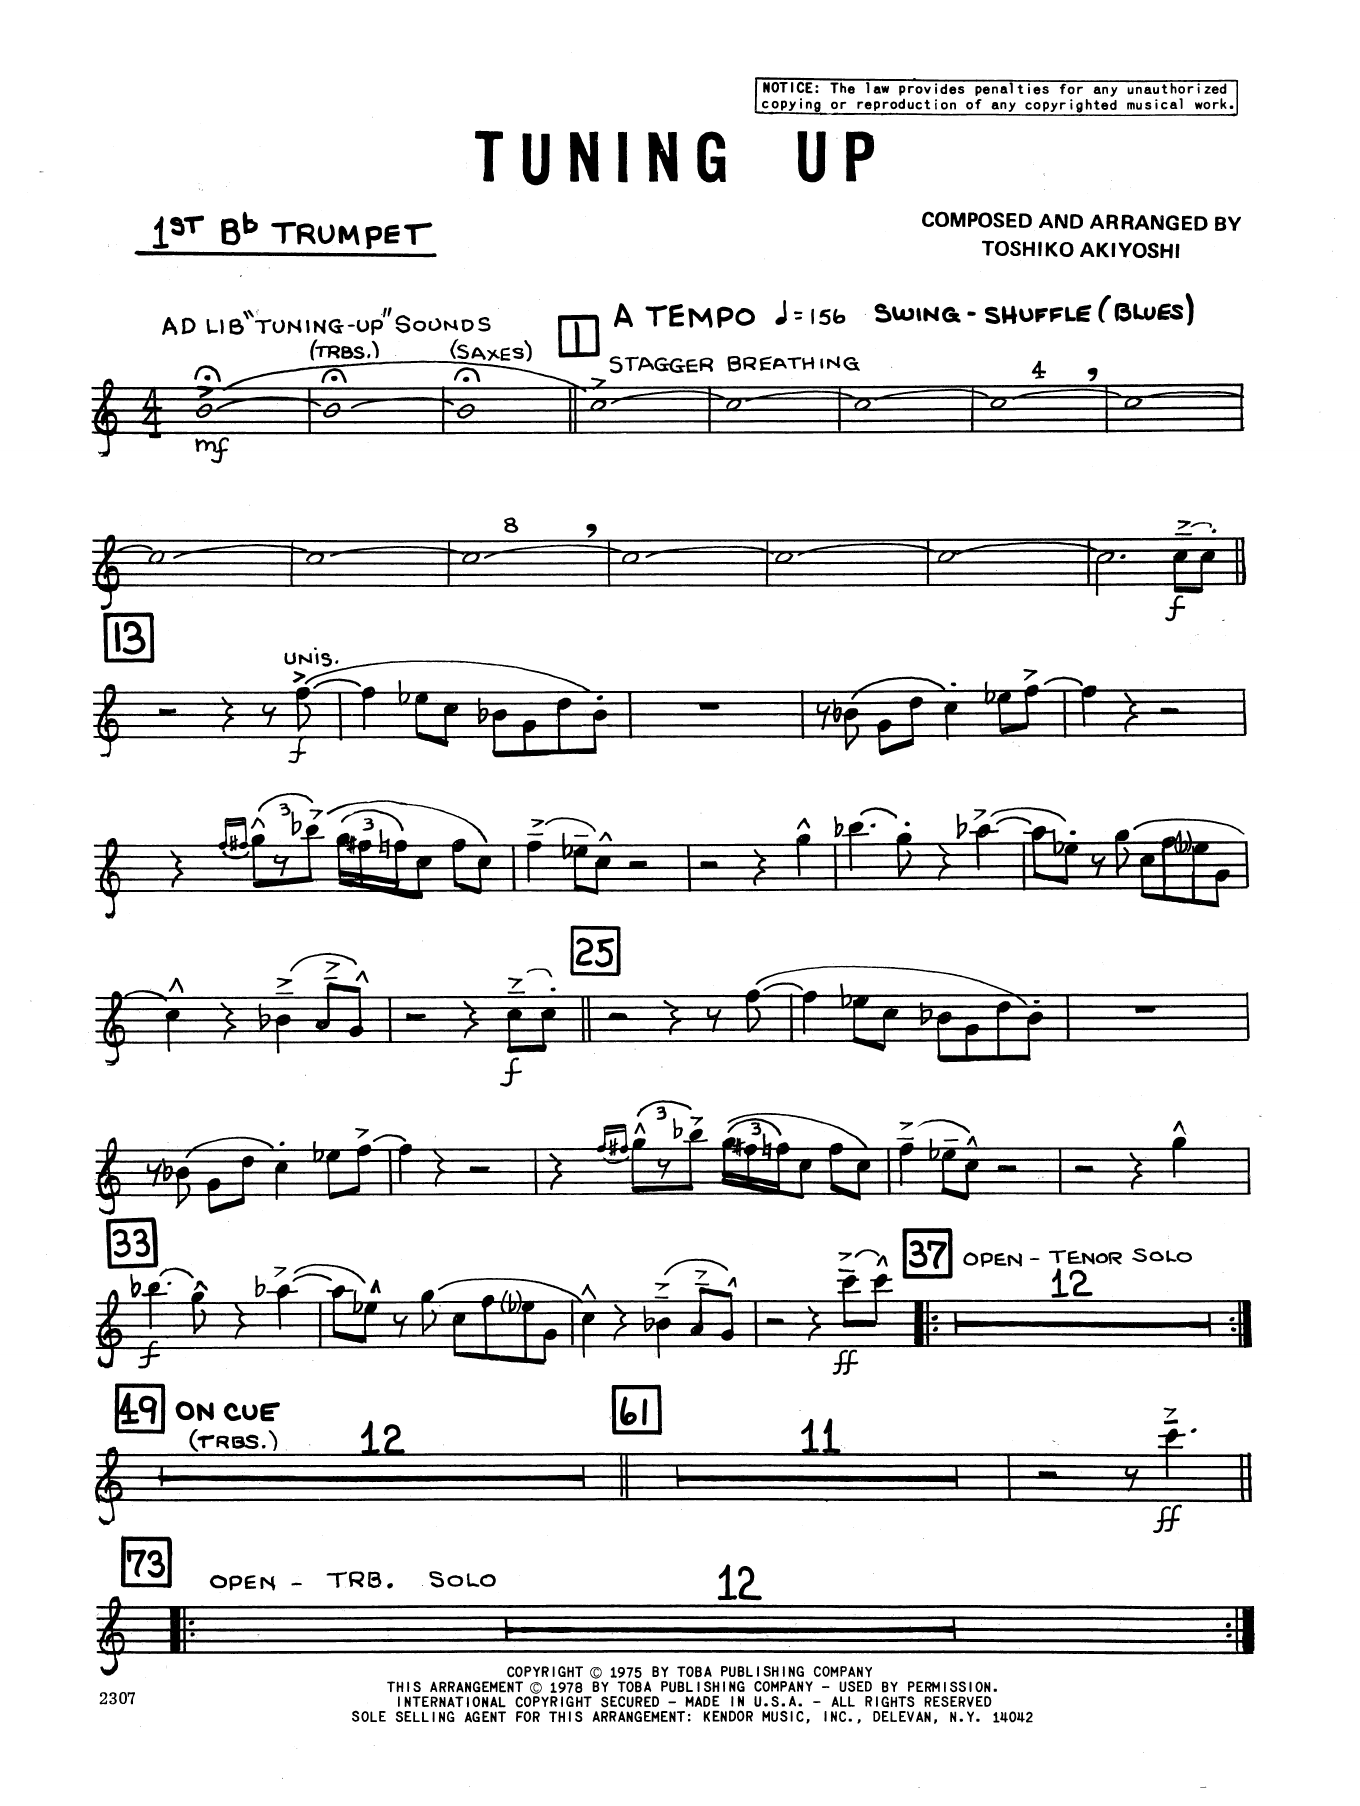 Toshiko Akiyoshi Tuning Up - 1st Bb Trumpet sheet music preview music notes and score for Jazz Ensemble including 3 page(s)